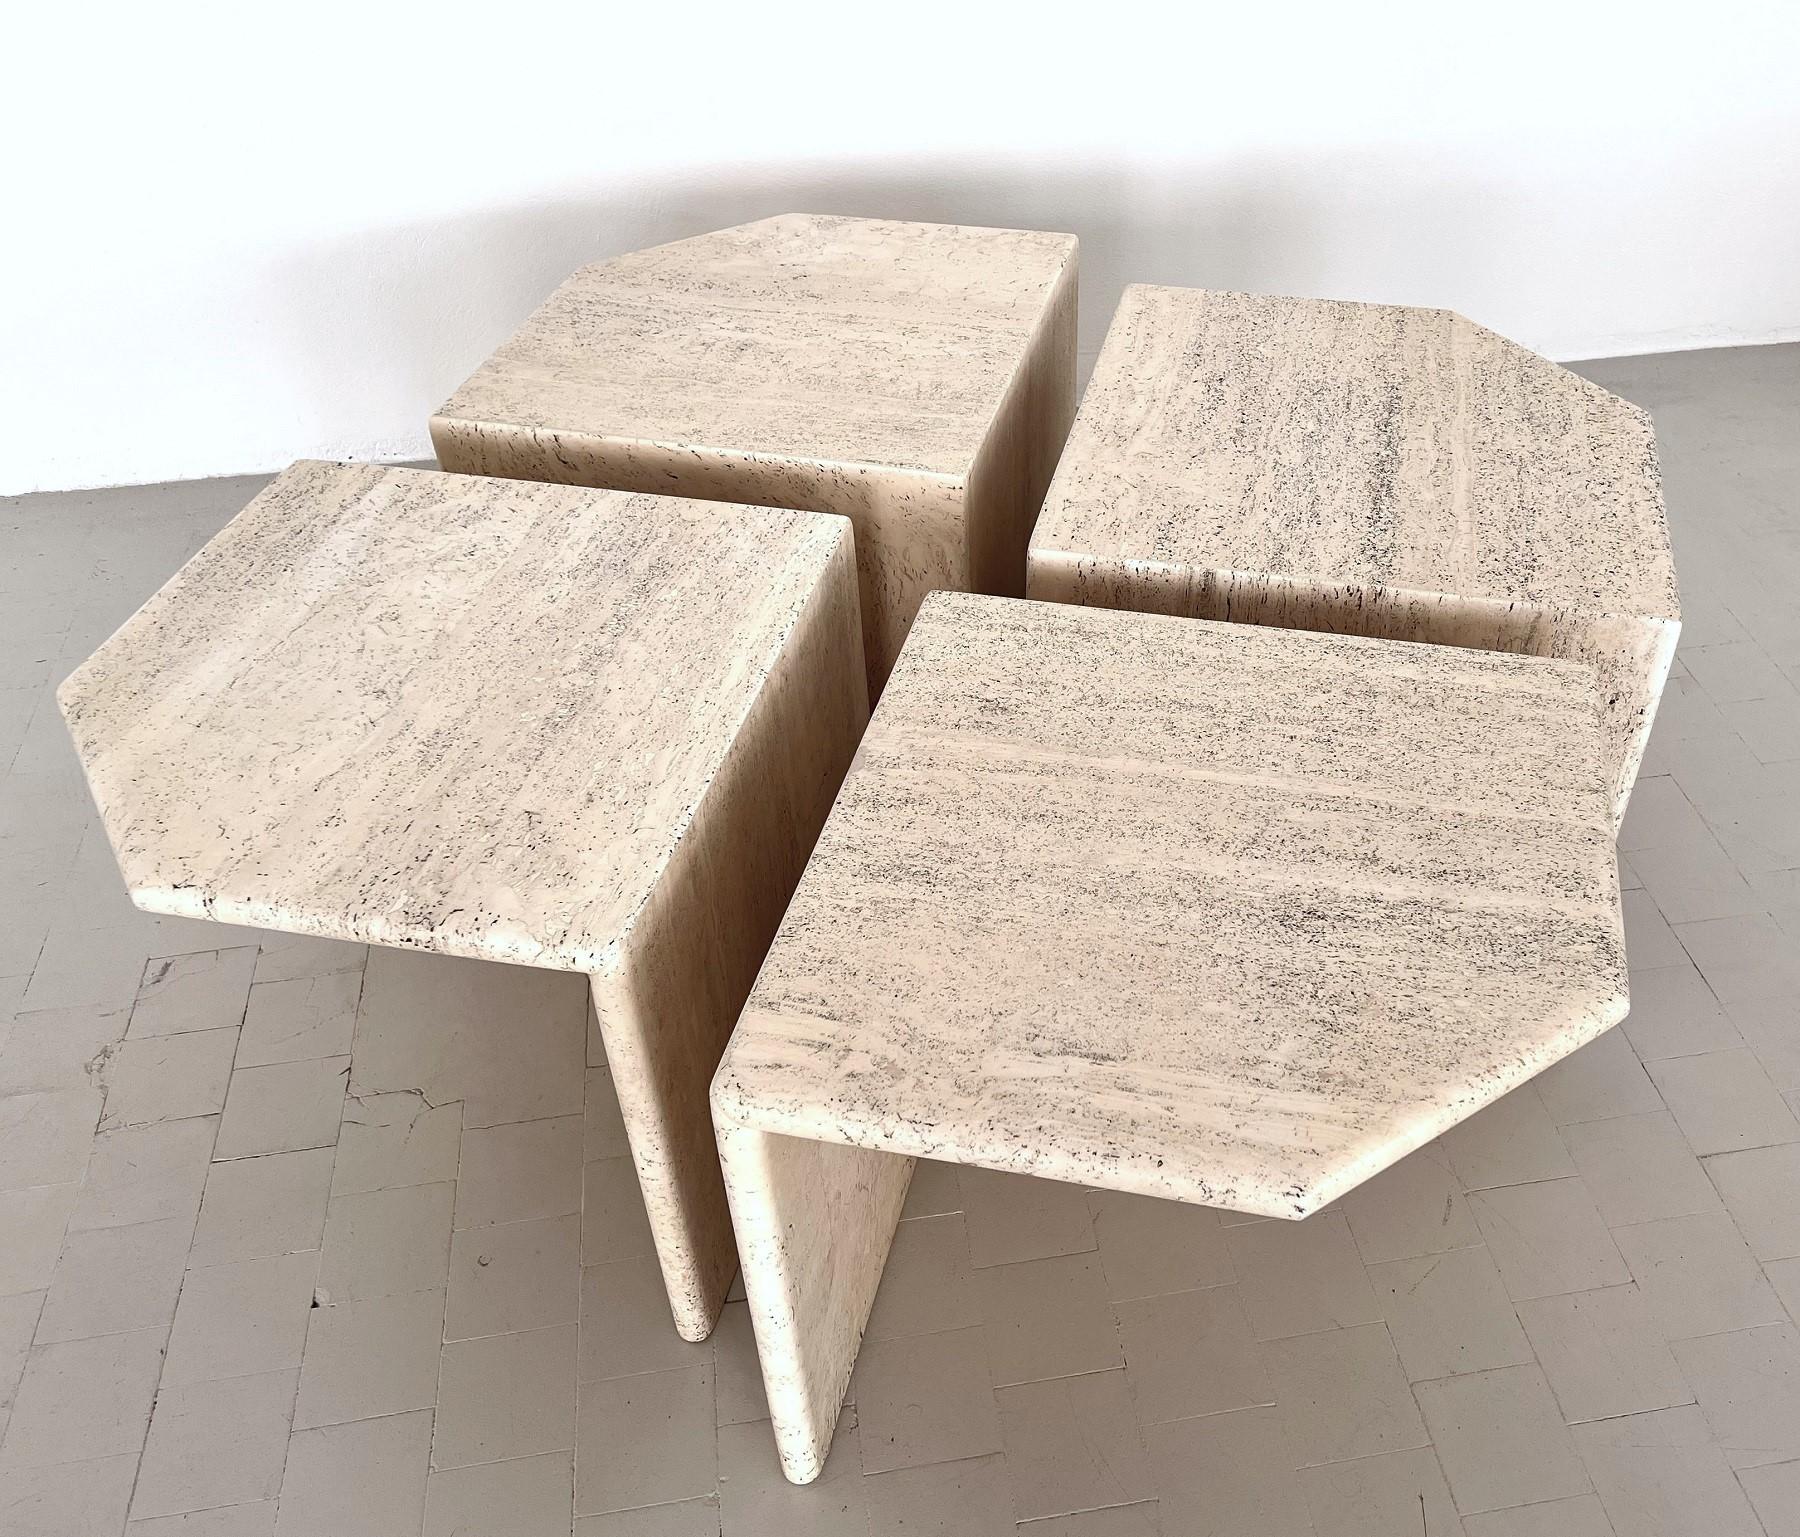 Italian Midcentury Sectional Travertine Marble Coffee Table of Four Pieces, 1970 For Sale 4